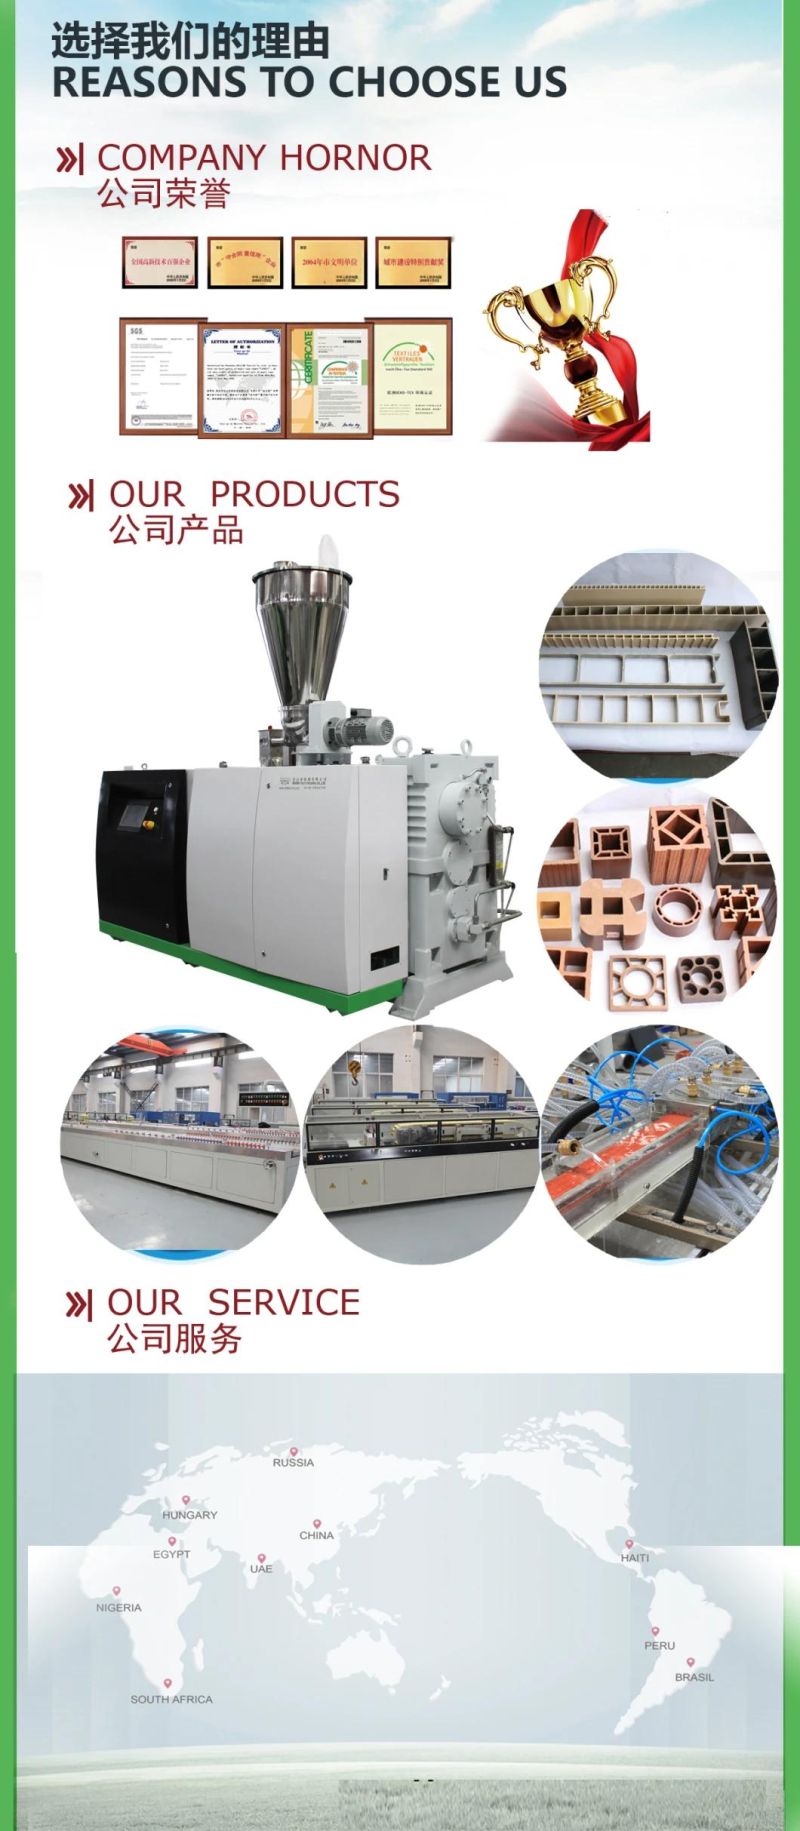 (Midtech Industry) Plastic Foam PE/HDPE Ocean Marine Pedal Hollow Board Extrusion/Extruder Making Machinery